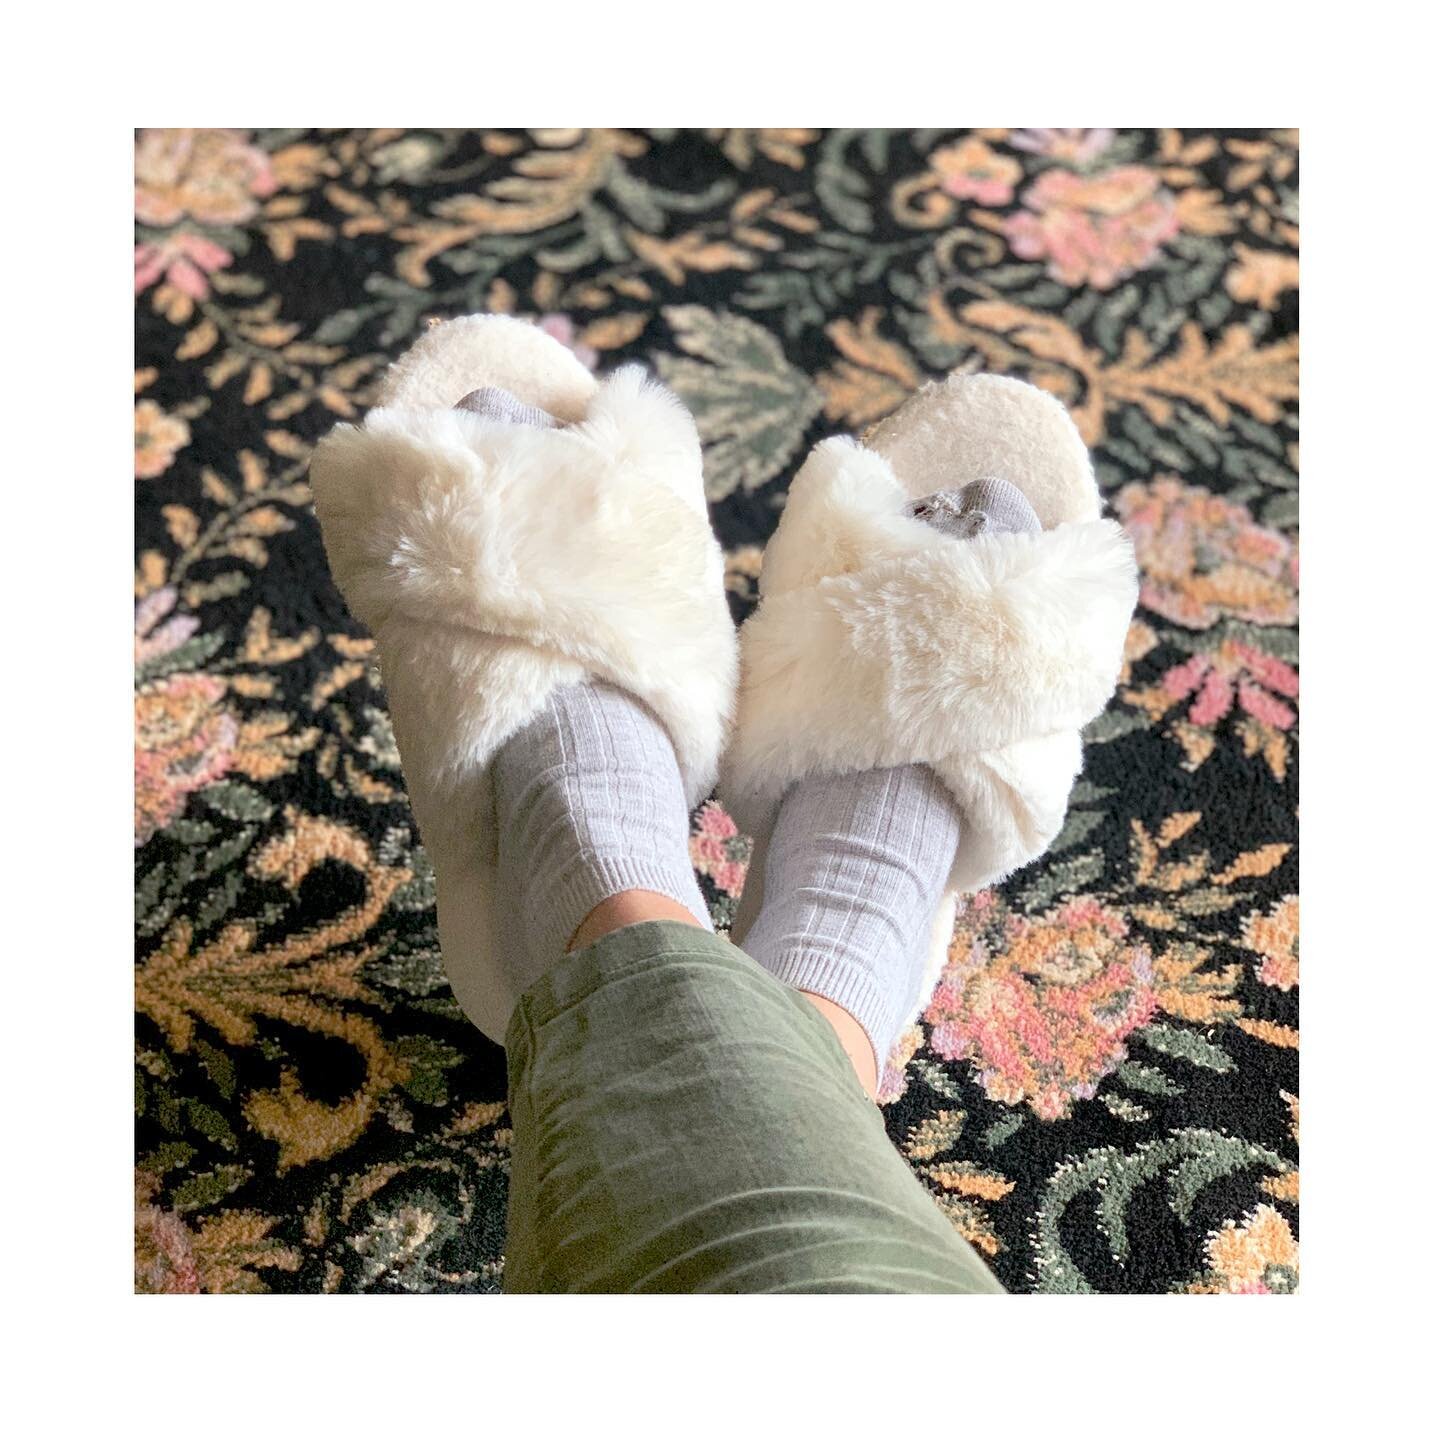 slippers
(with failed resewn hole-y socks)
best gift received in 2020, 
during the toughest week of 2020
thanks @merewelch ❤️ 
Michigan burbs, winter 2020